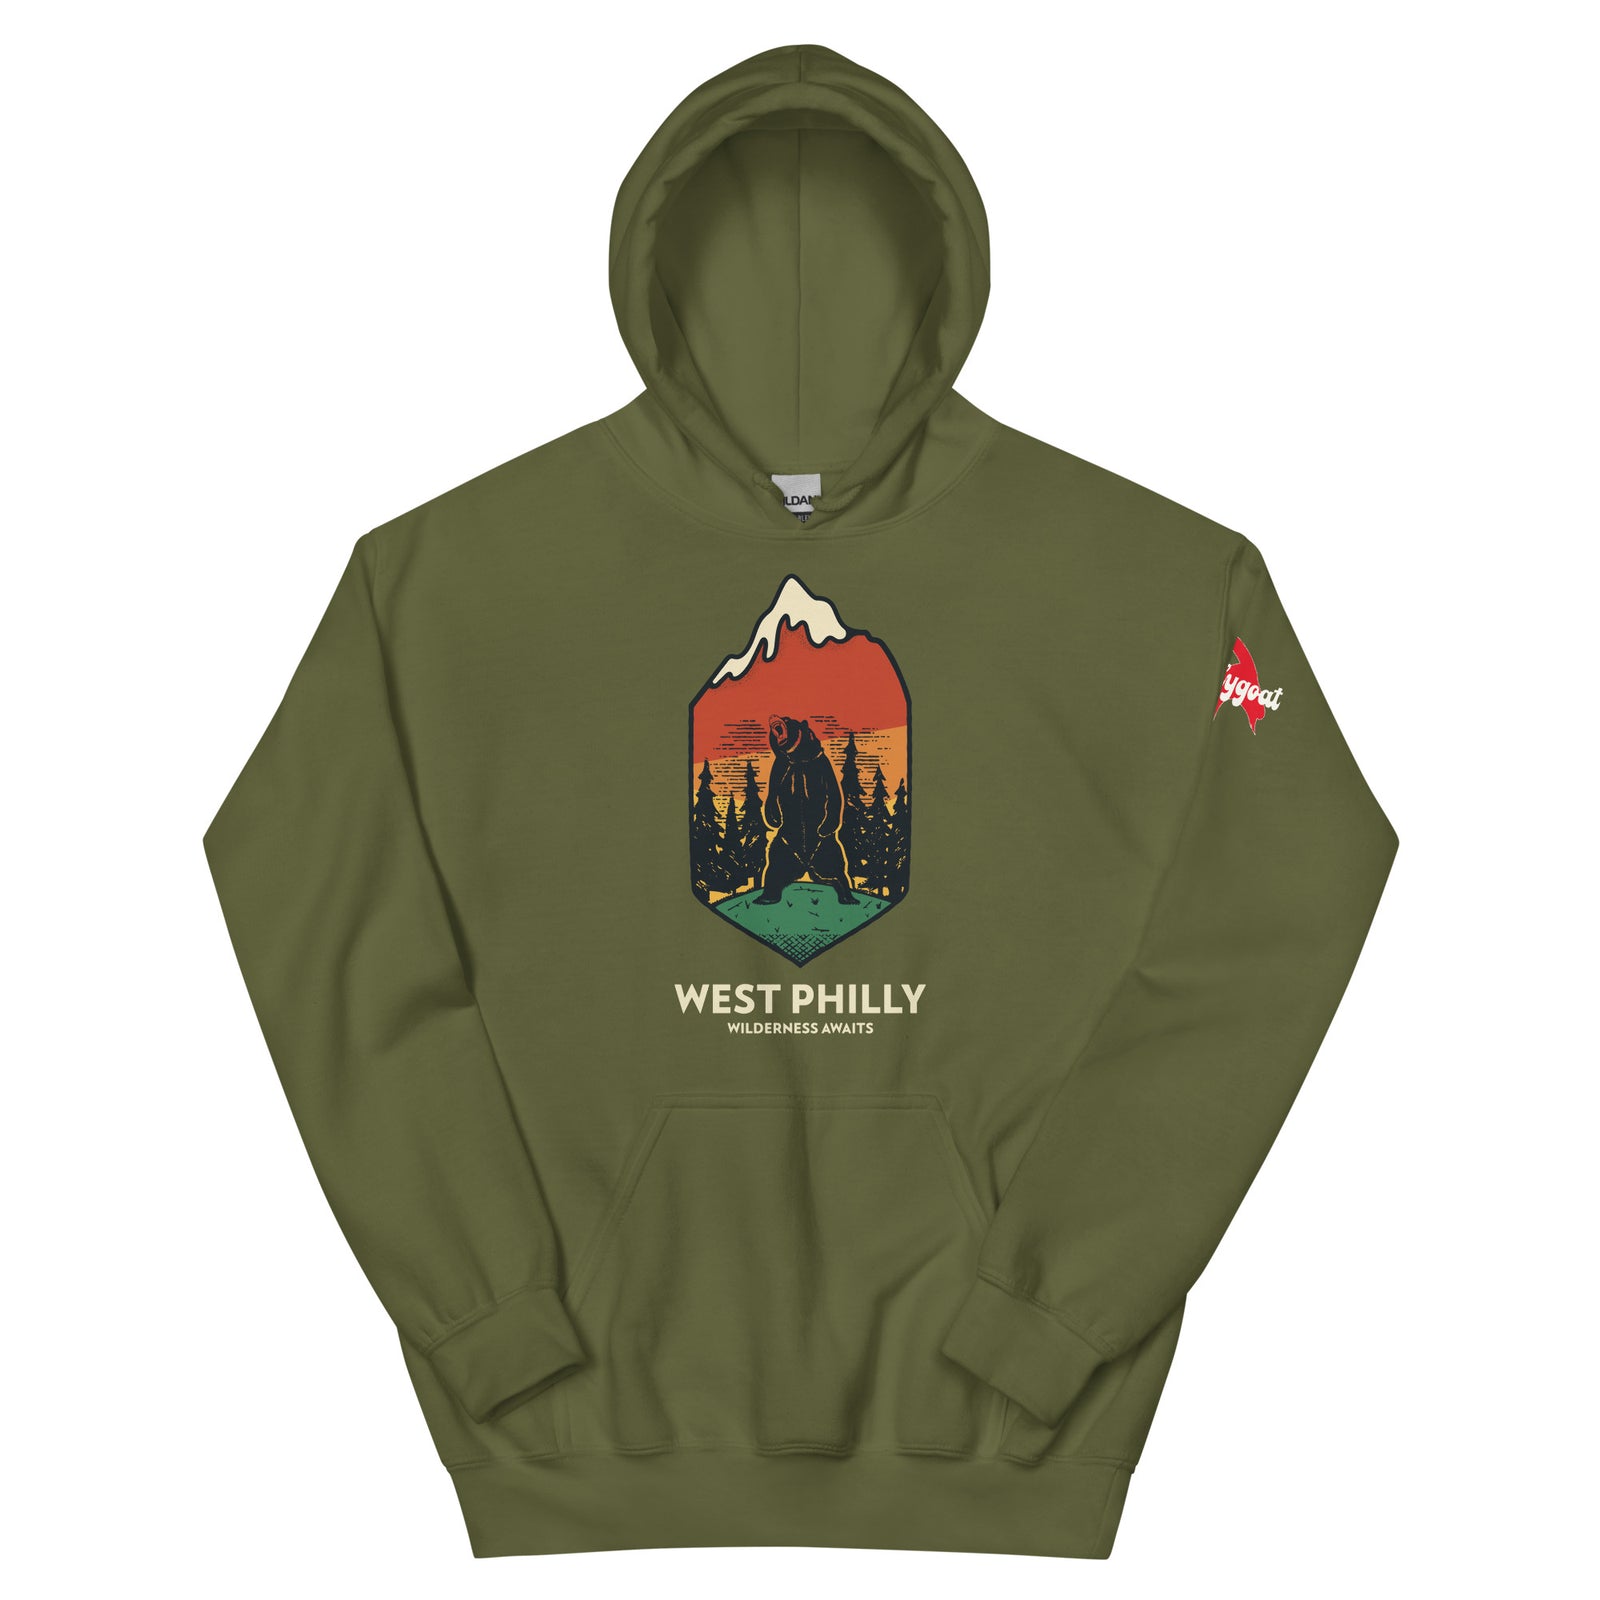 West Philly Philadelphia outdoors wilderness army green hoodie Phillygoat